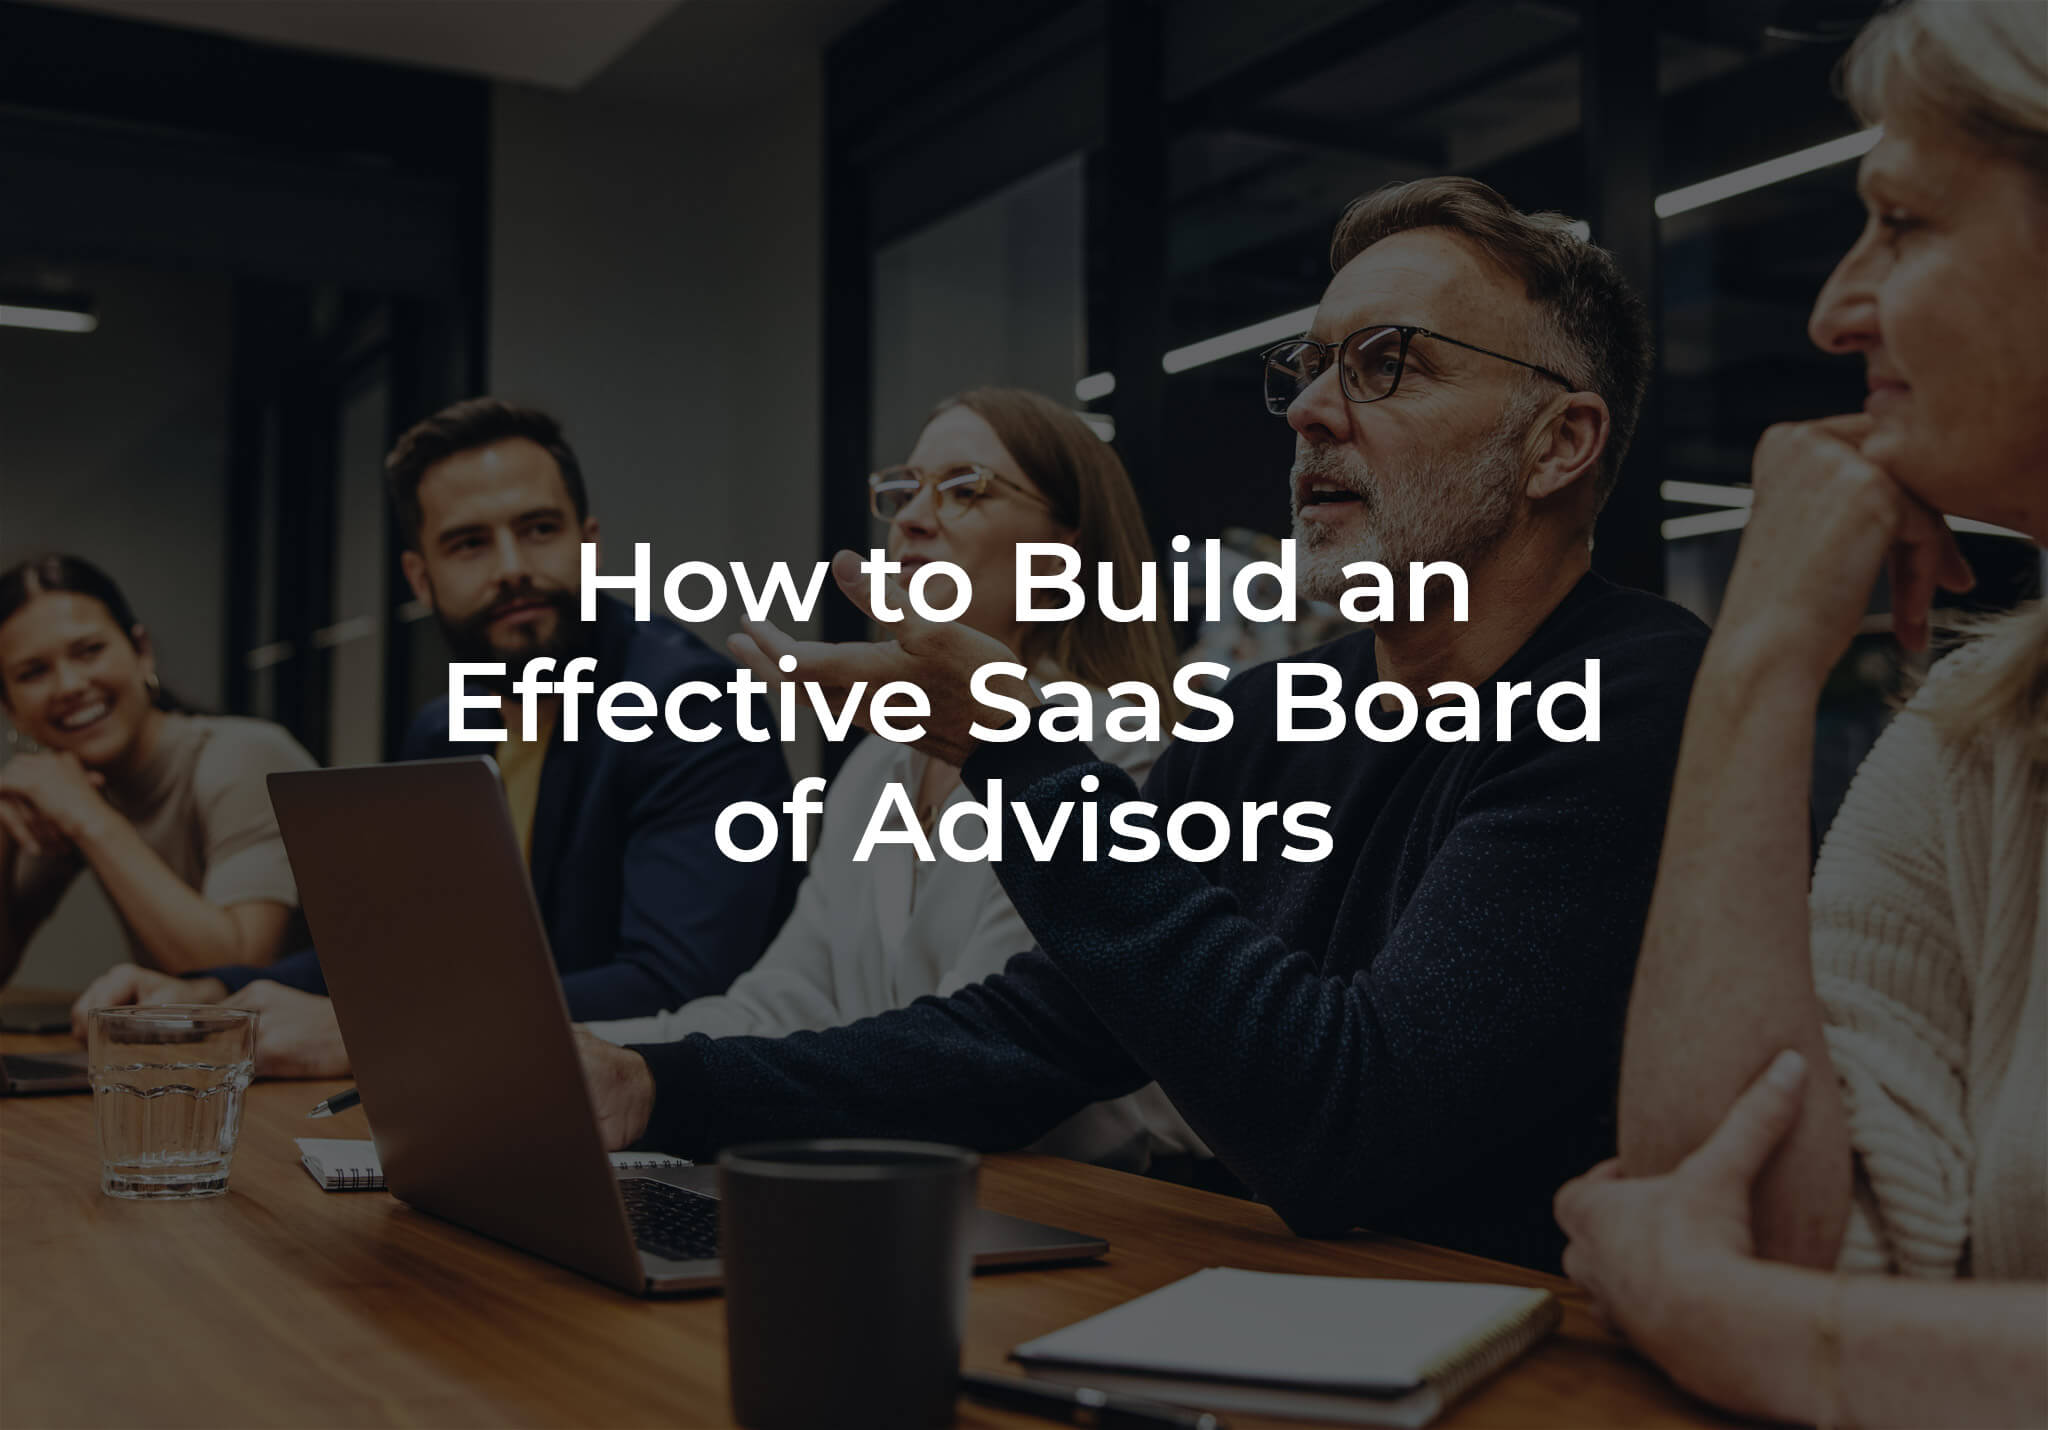 How To Build an Effective SaaS Board of Advisors